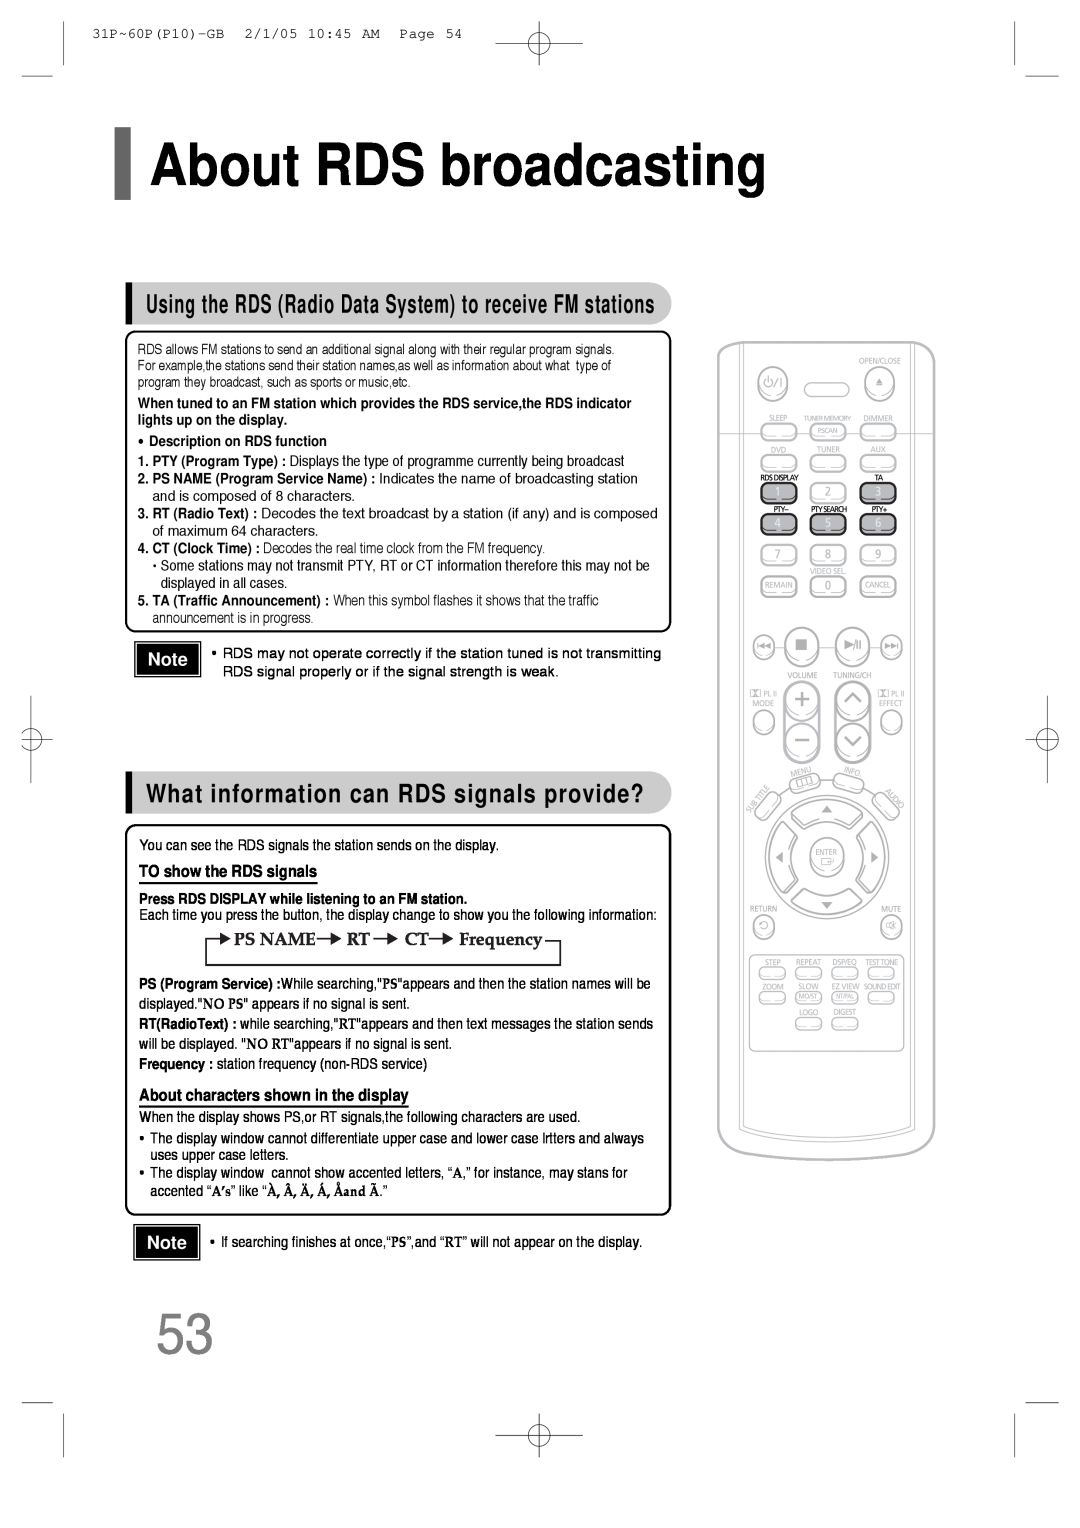 Samsung P10 instruction manual About RDS broadcasting, What information can RDS signals provide?, TO show the RDS signals 